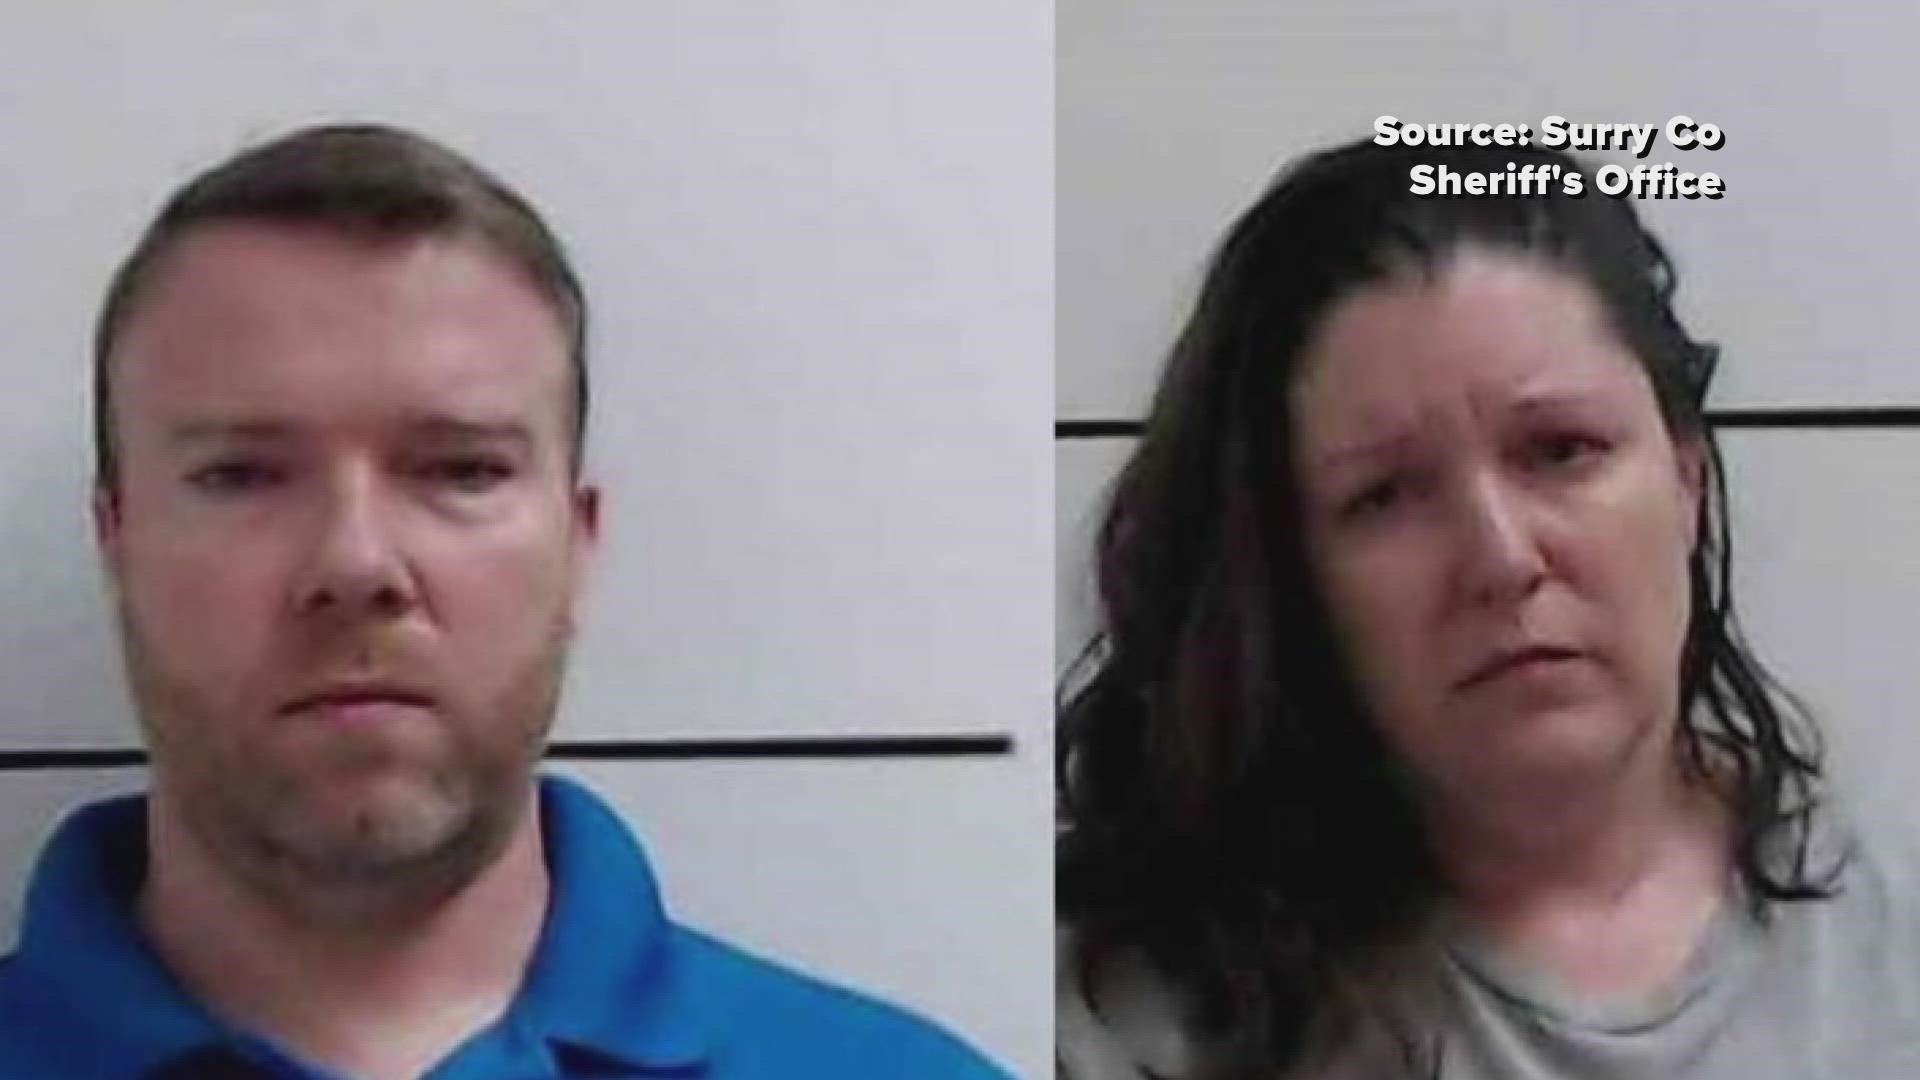 Adoptive parents Joseph and Jodi Wilson are facing murder charges in the death of a 4-year-old child.